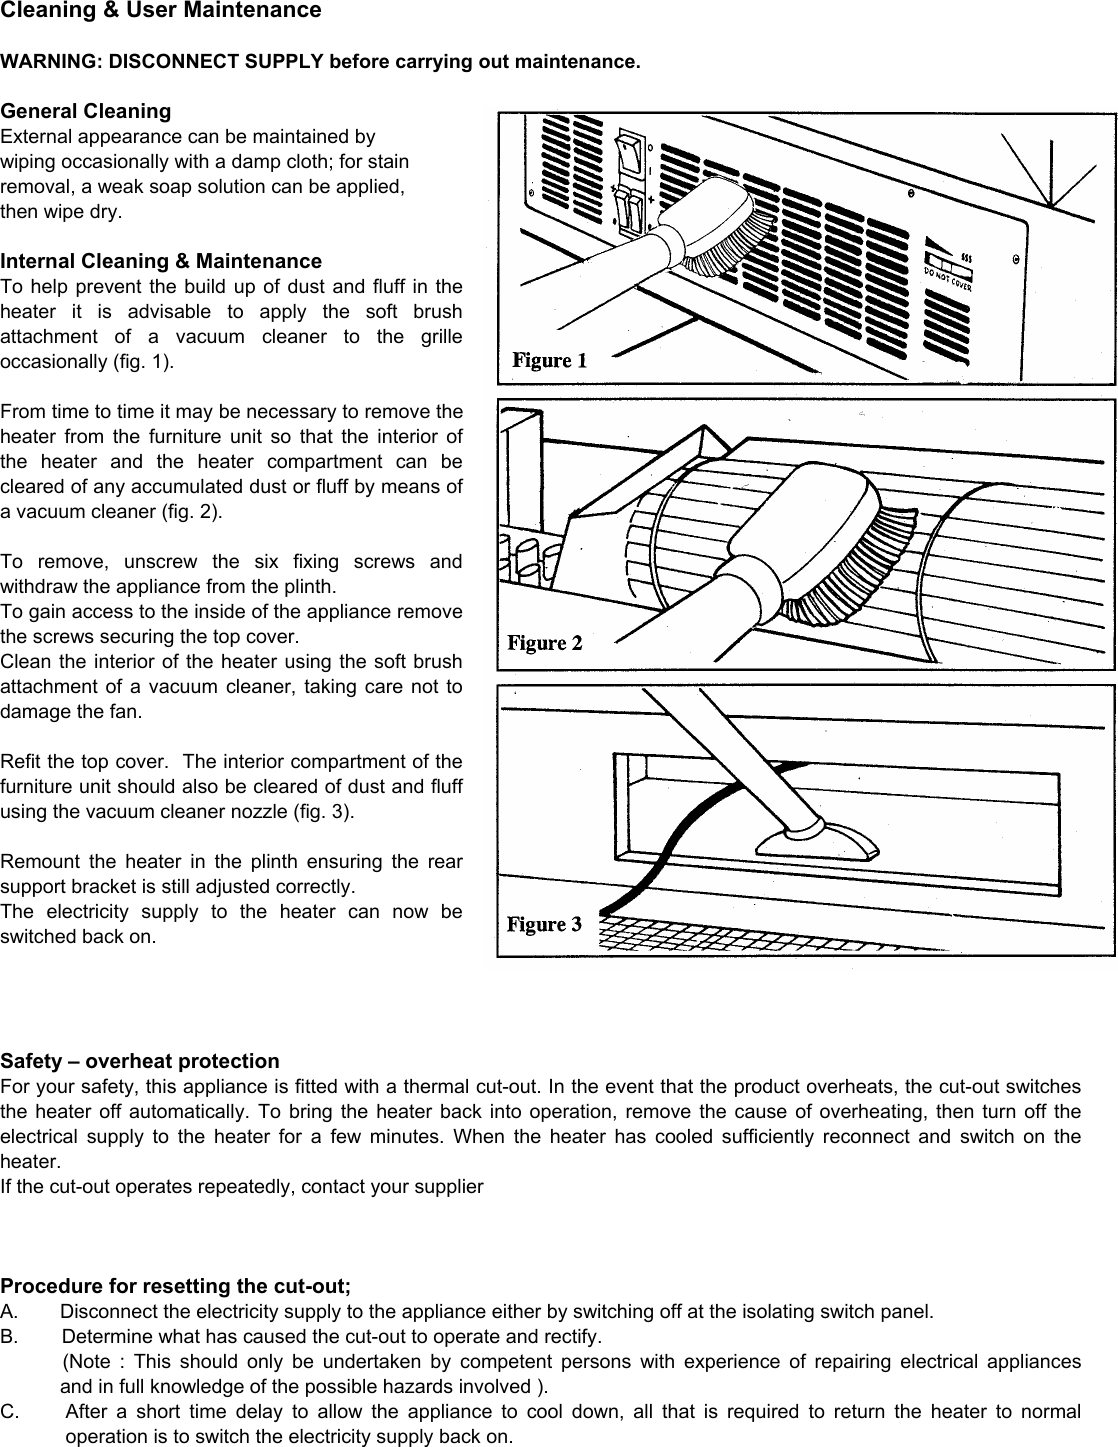 Page 3 of 4 - Dimplex Dimplex-Bfh24T-Users-Manual BFH24T Base Unit Heater - Issue 7